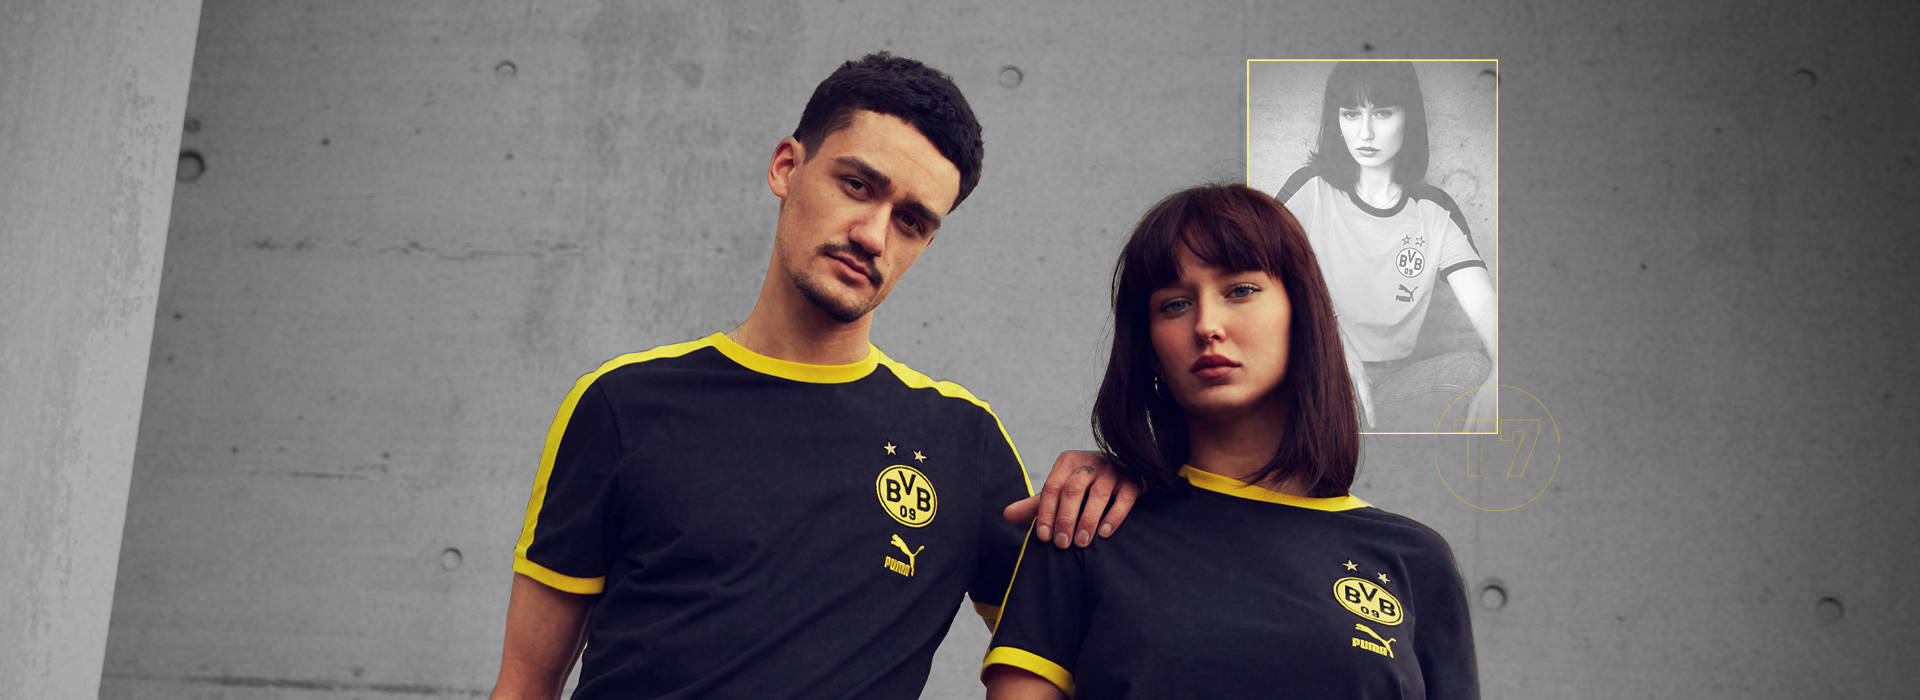 Puma Heritage New BVB Collection